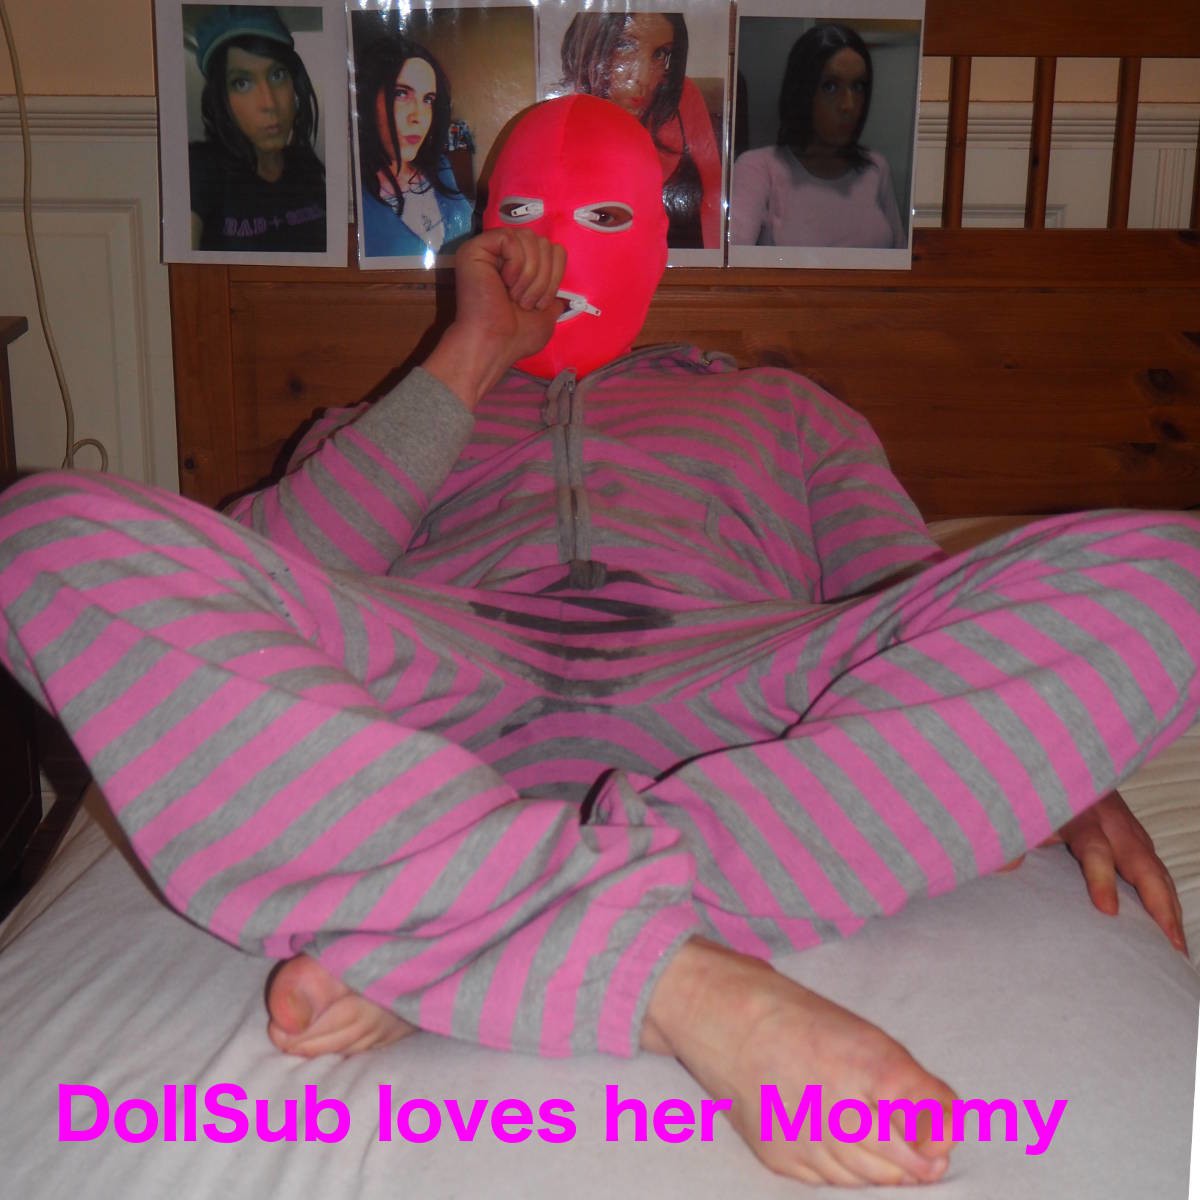 Free porn pics of DollSub as silly baby 2 of 8 pics